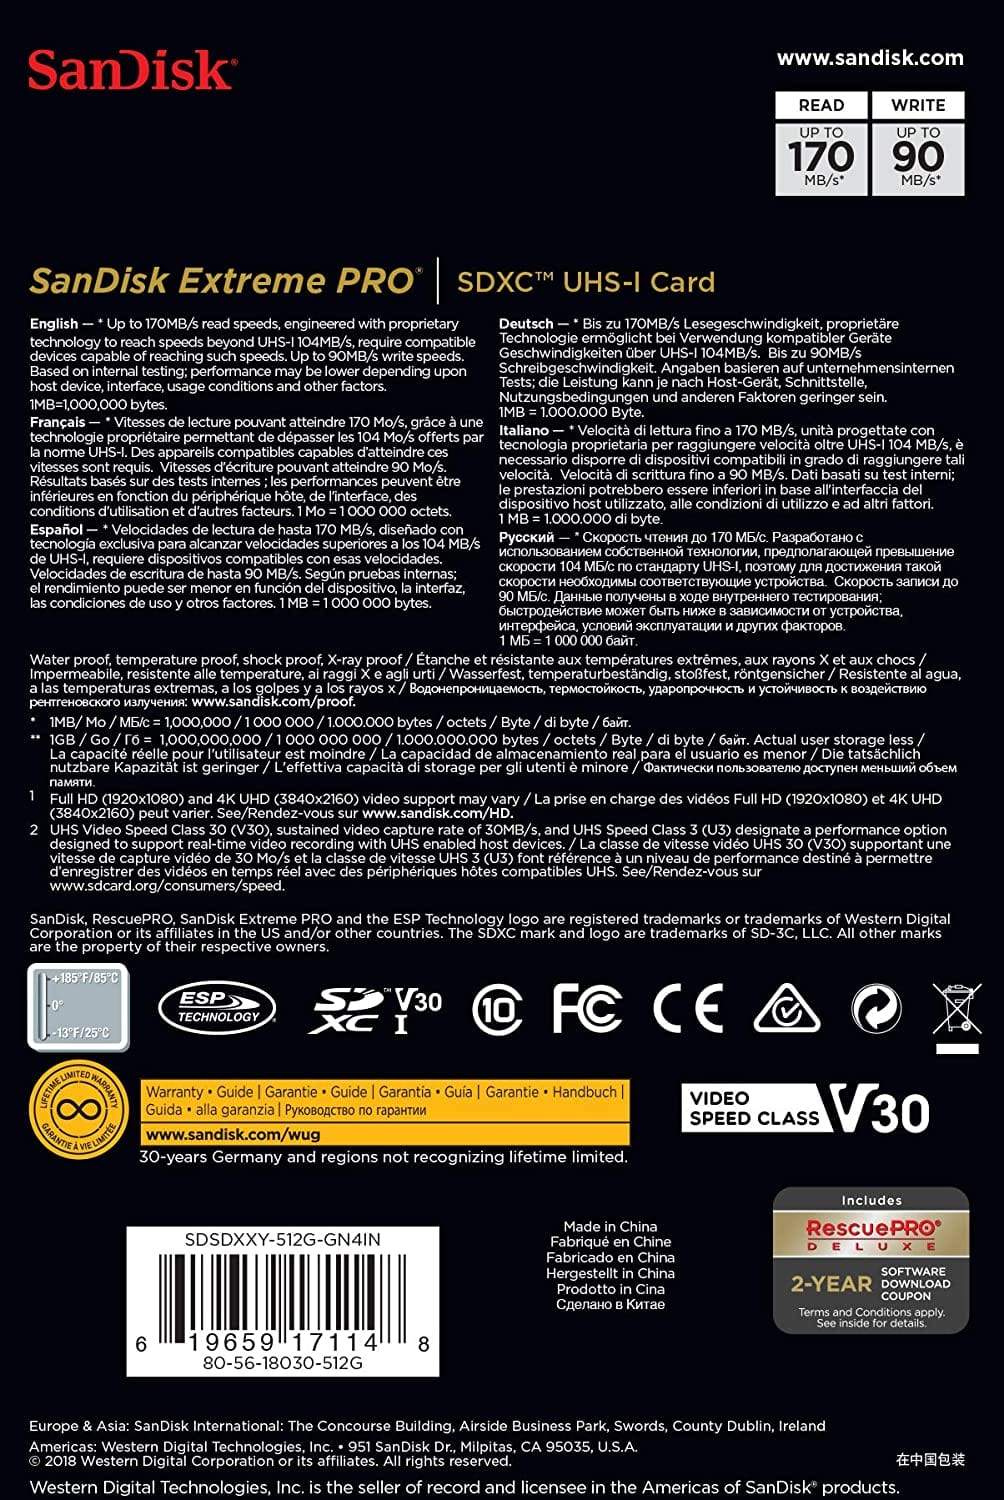 SanDisk Extreme Pro 512 GB Memory card SDSDXXY-512GB-GN4IN-Memory Cards-dealsplant